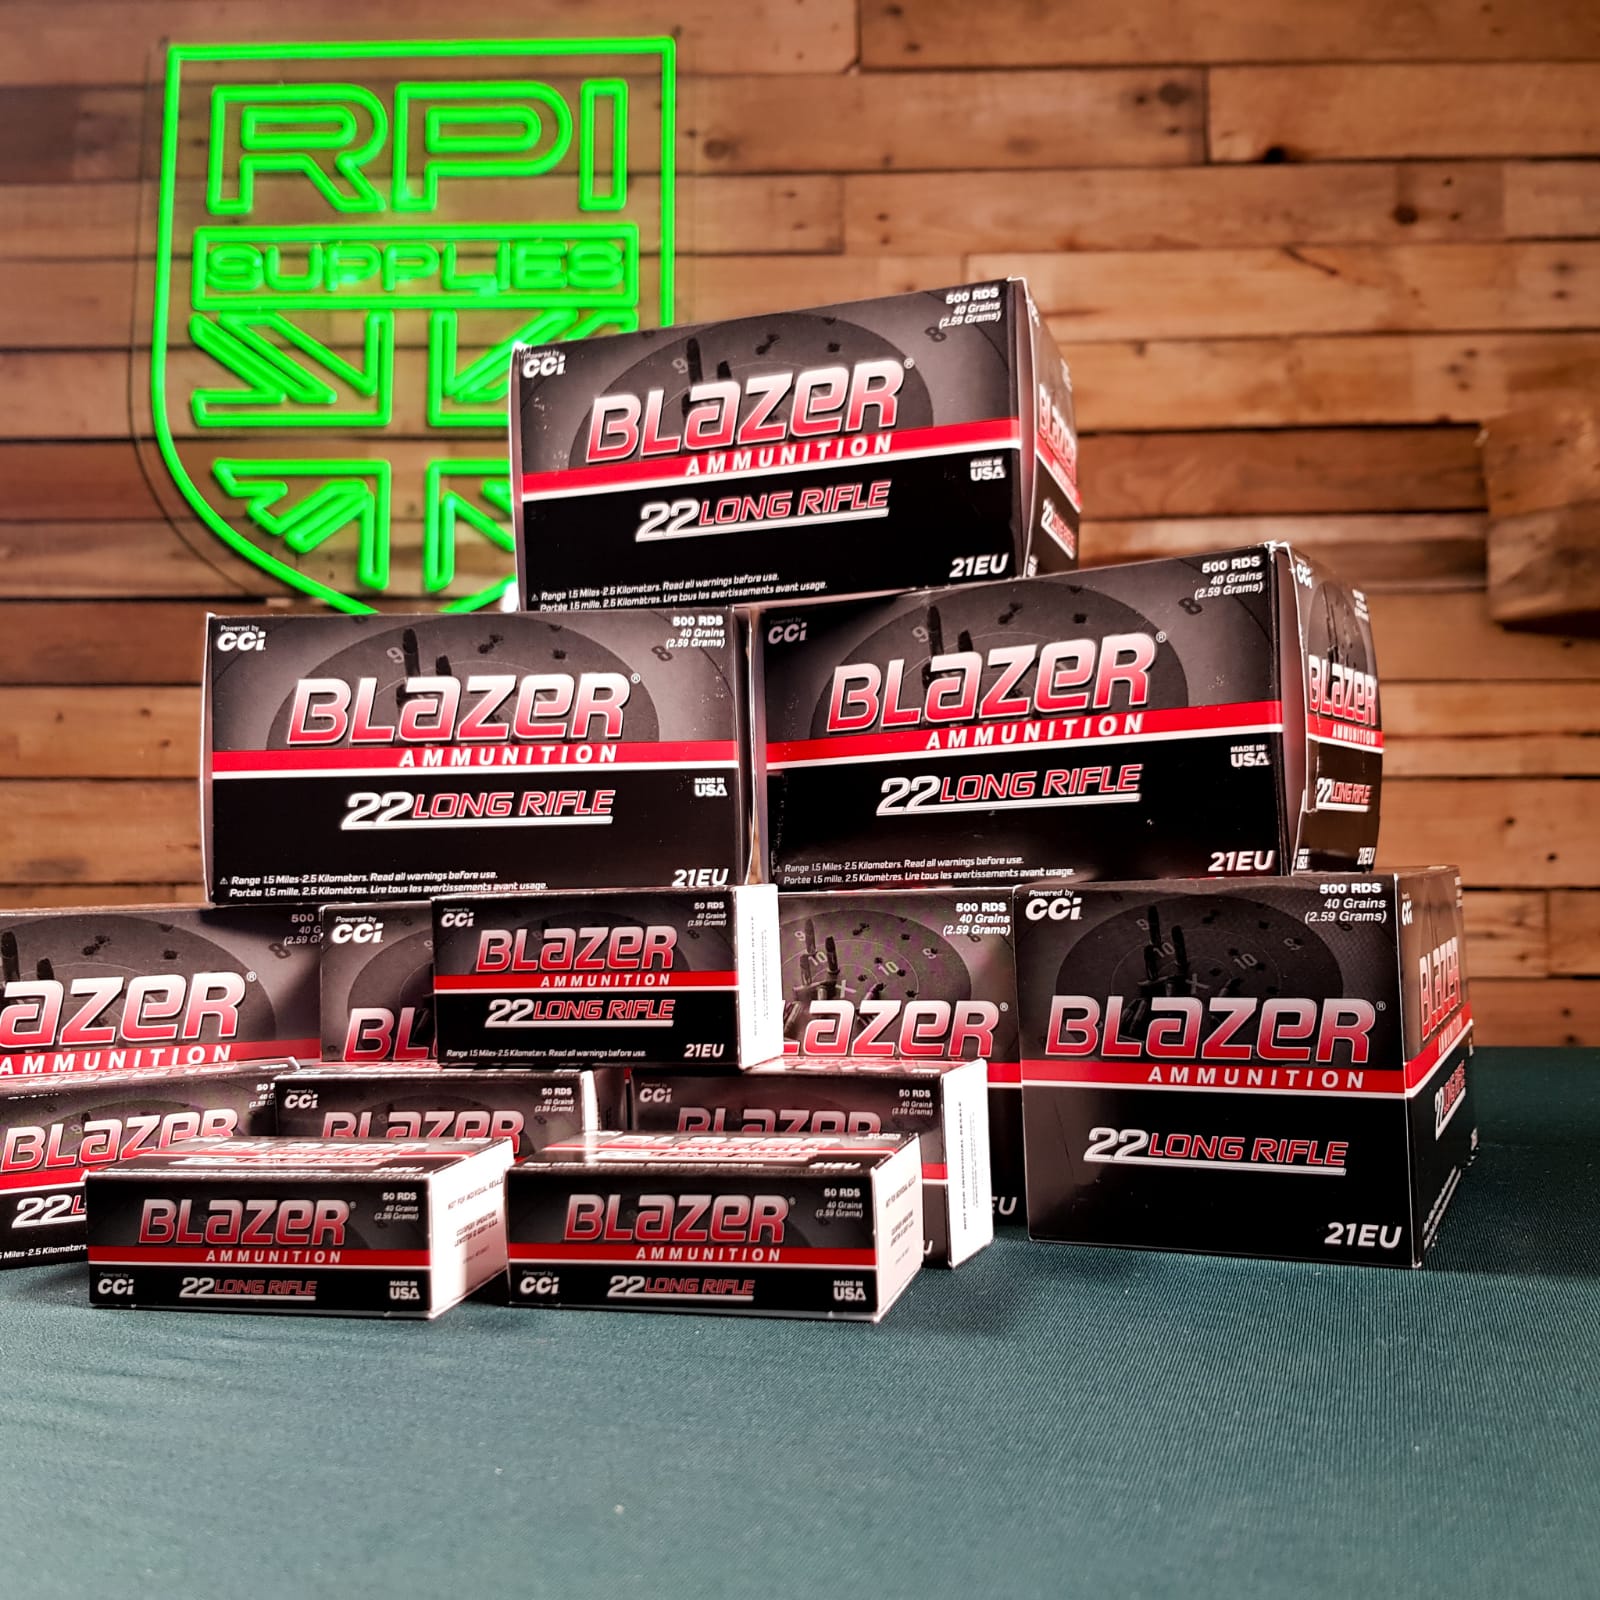 .22LR CCI Blazer rounds - Box of 50 -  In Stock - Contact to purchase - RPI Supplies